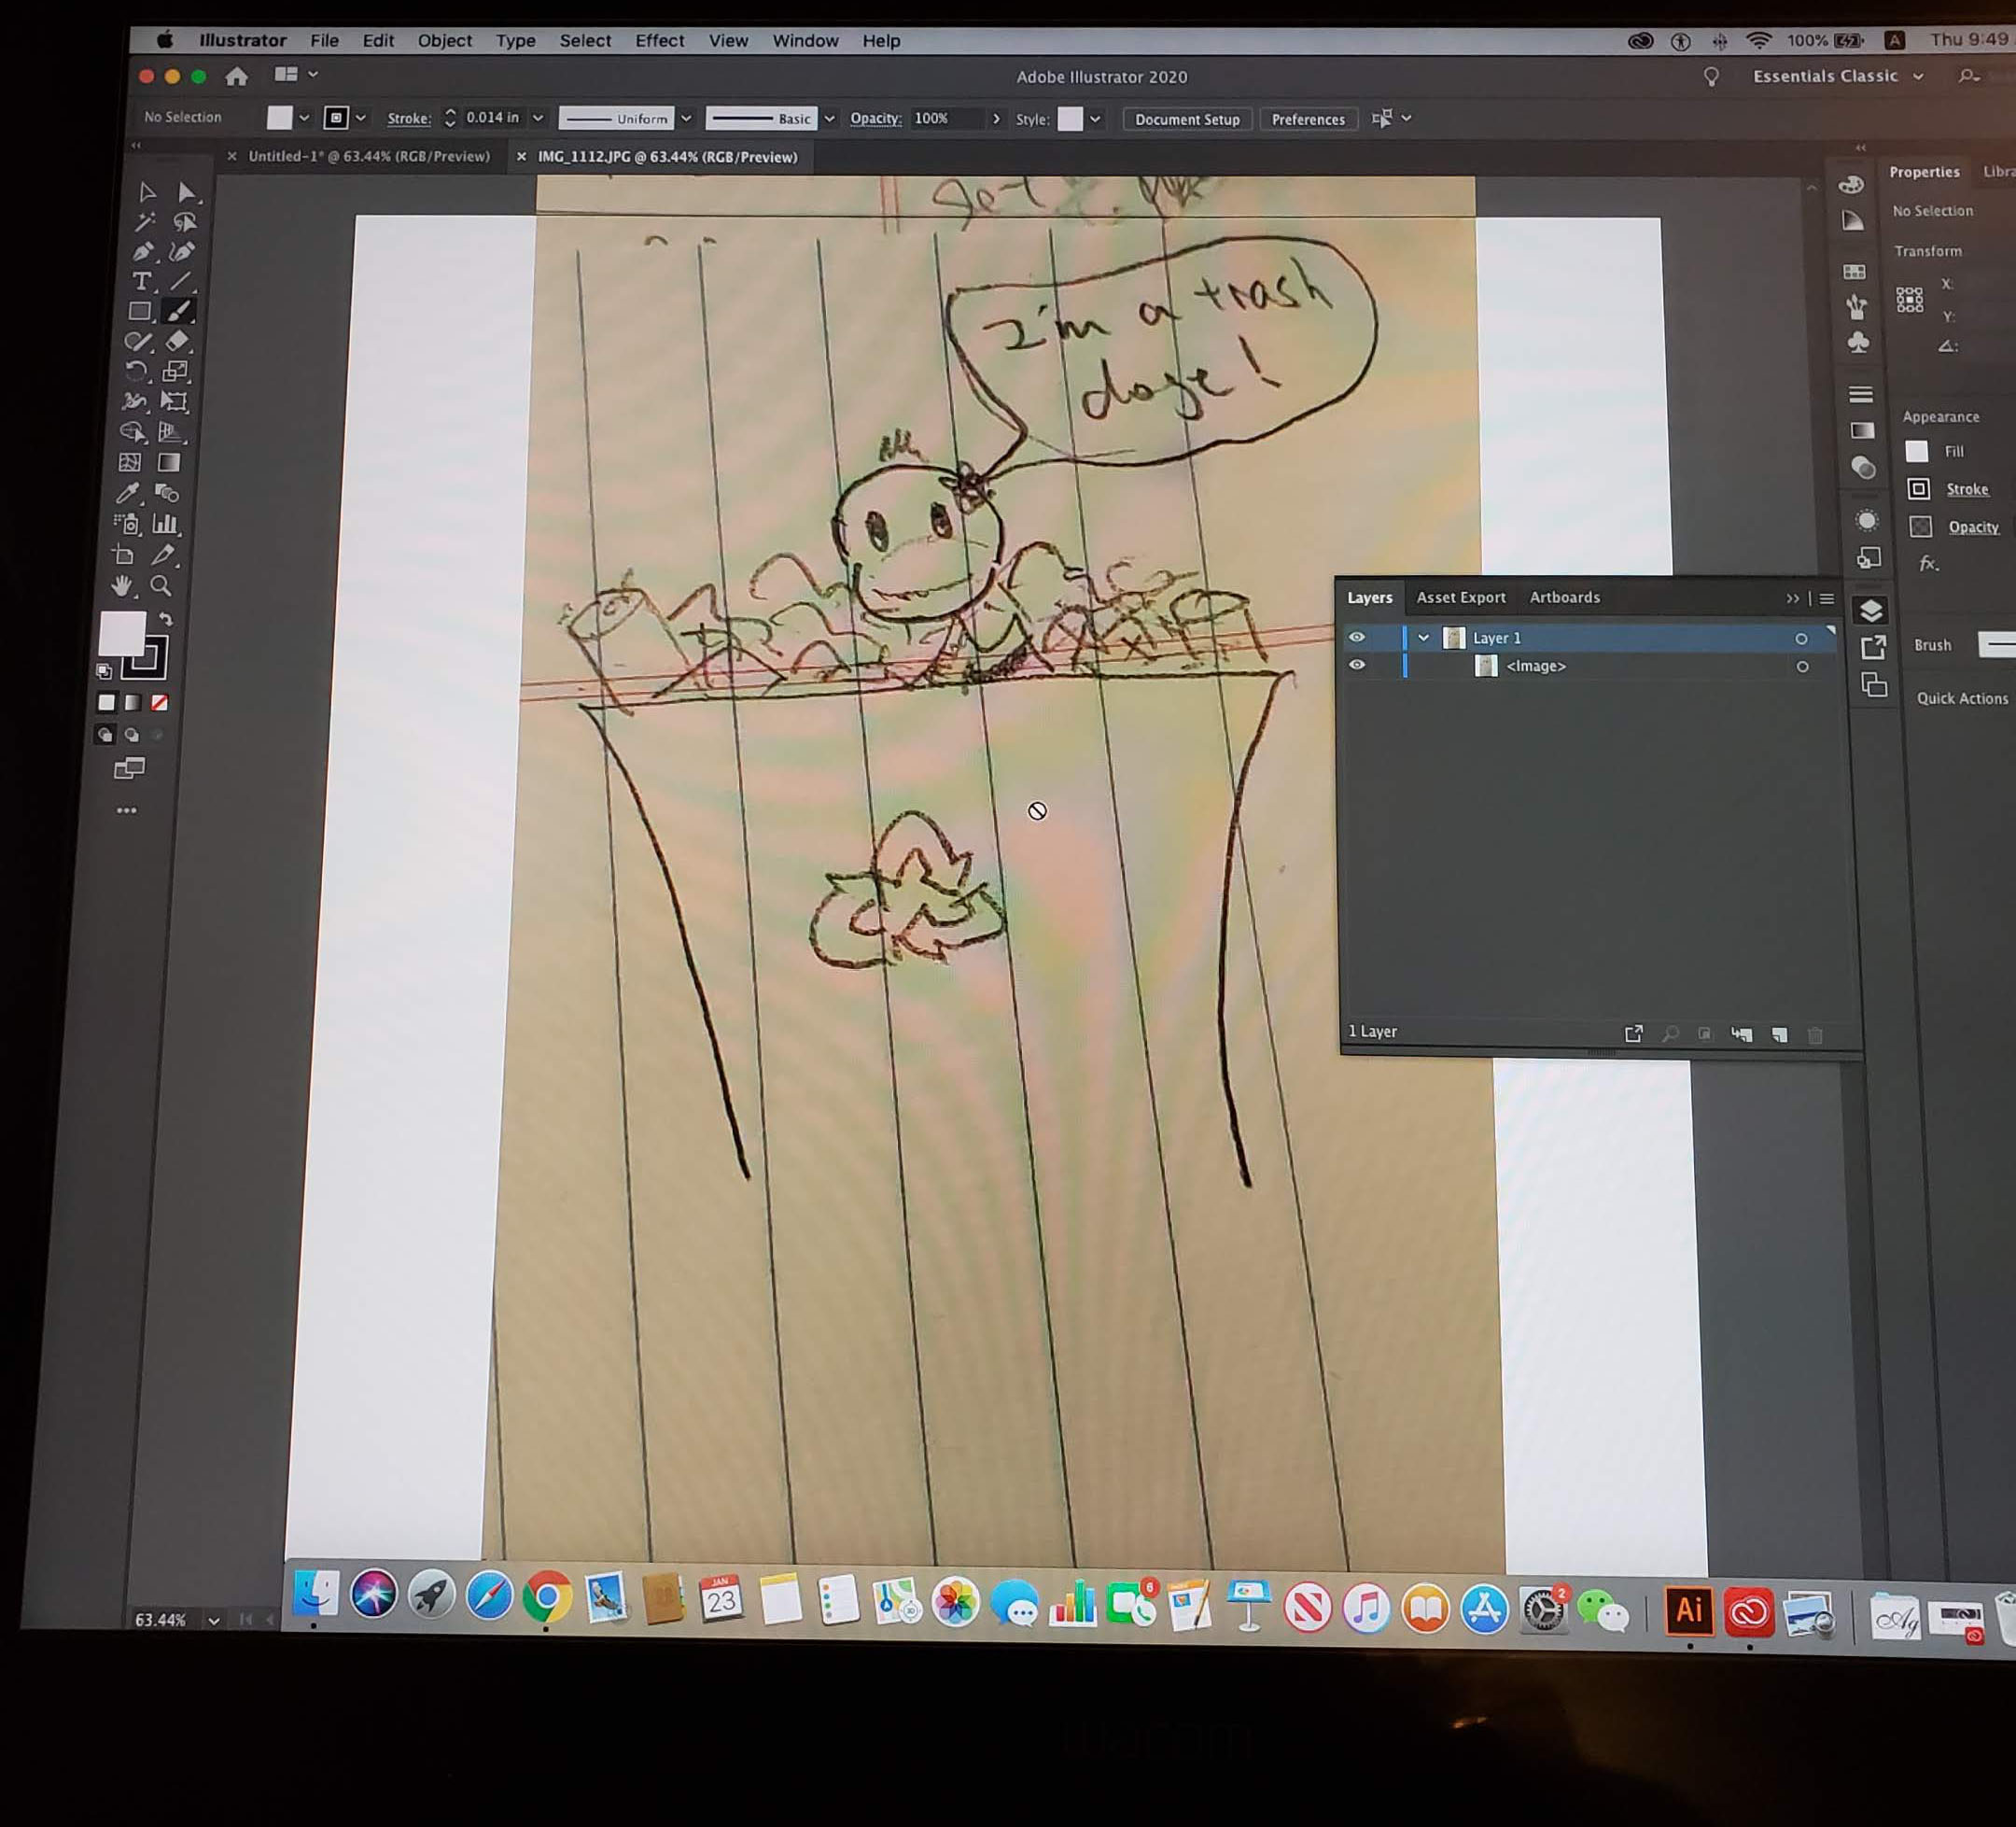 Solved: Can't draw on top of a photo in Illustrator 2020 - Adobe ...